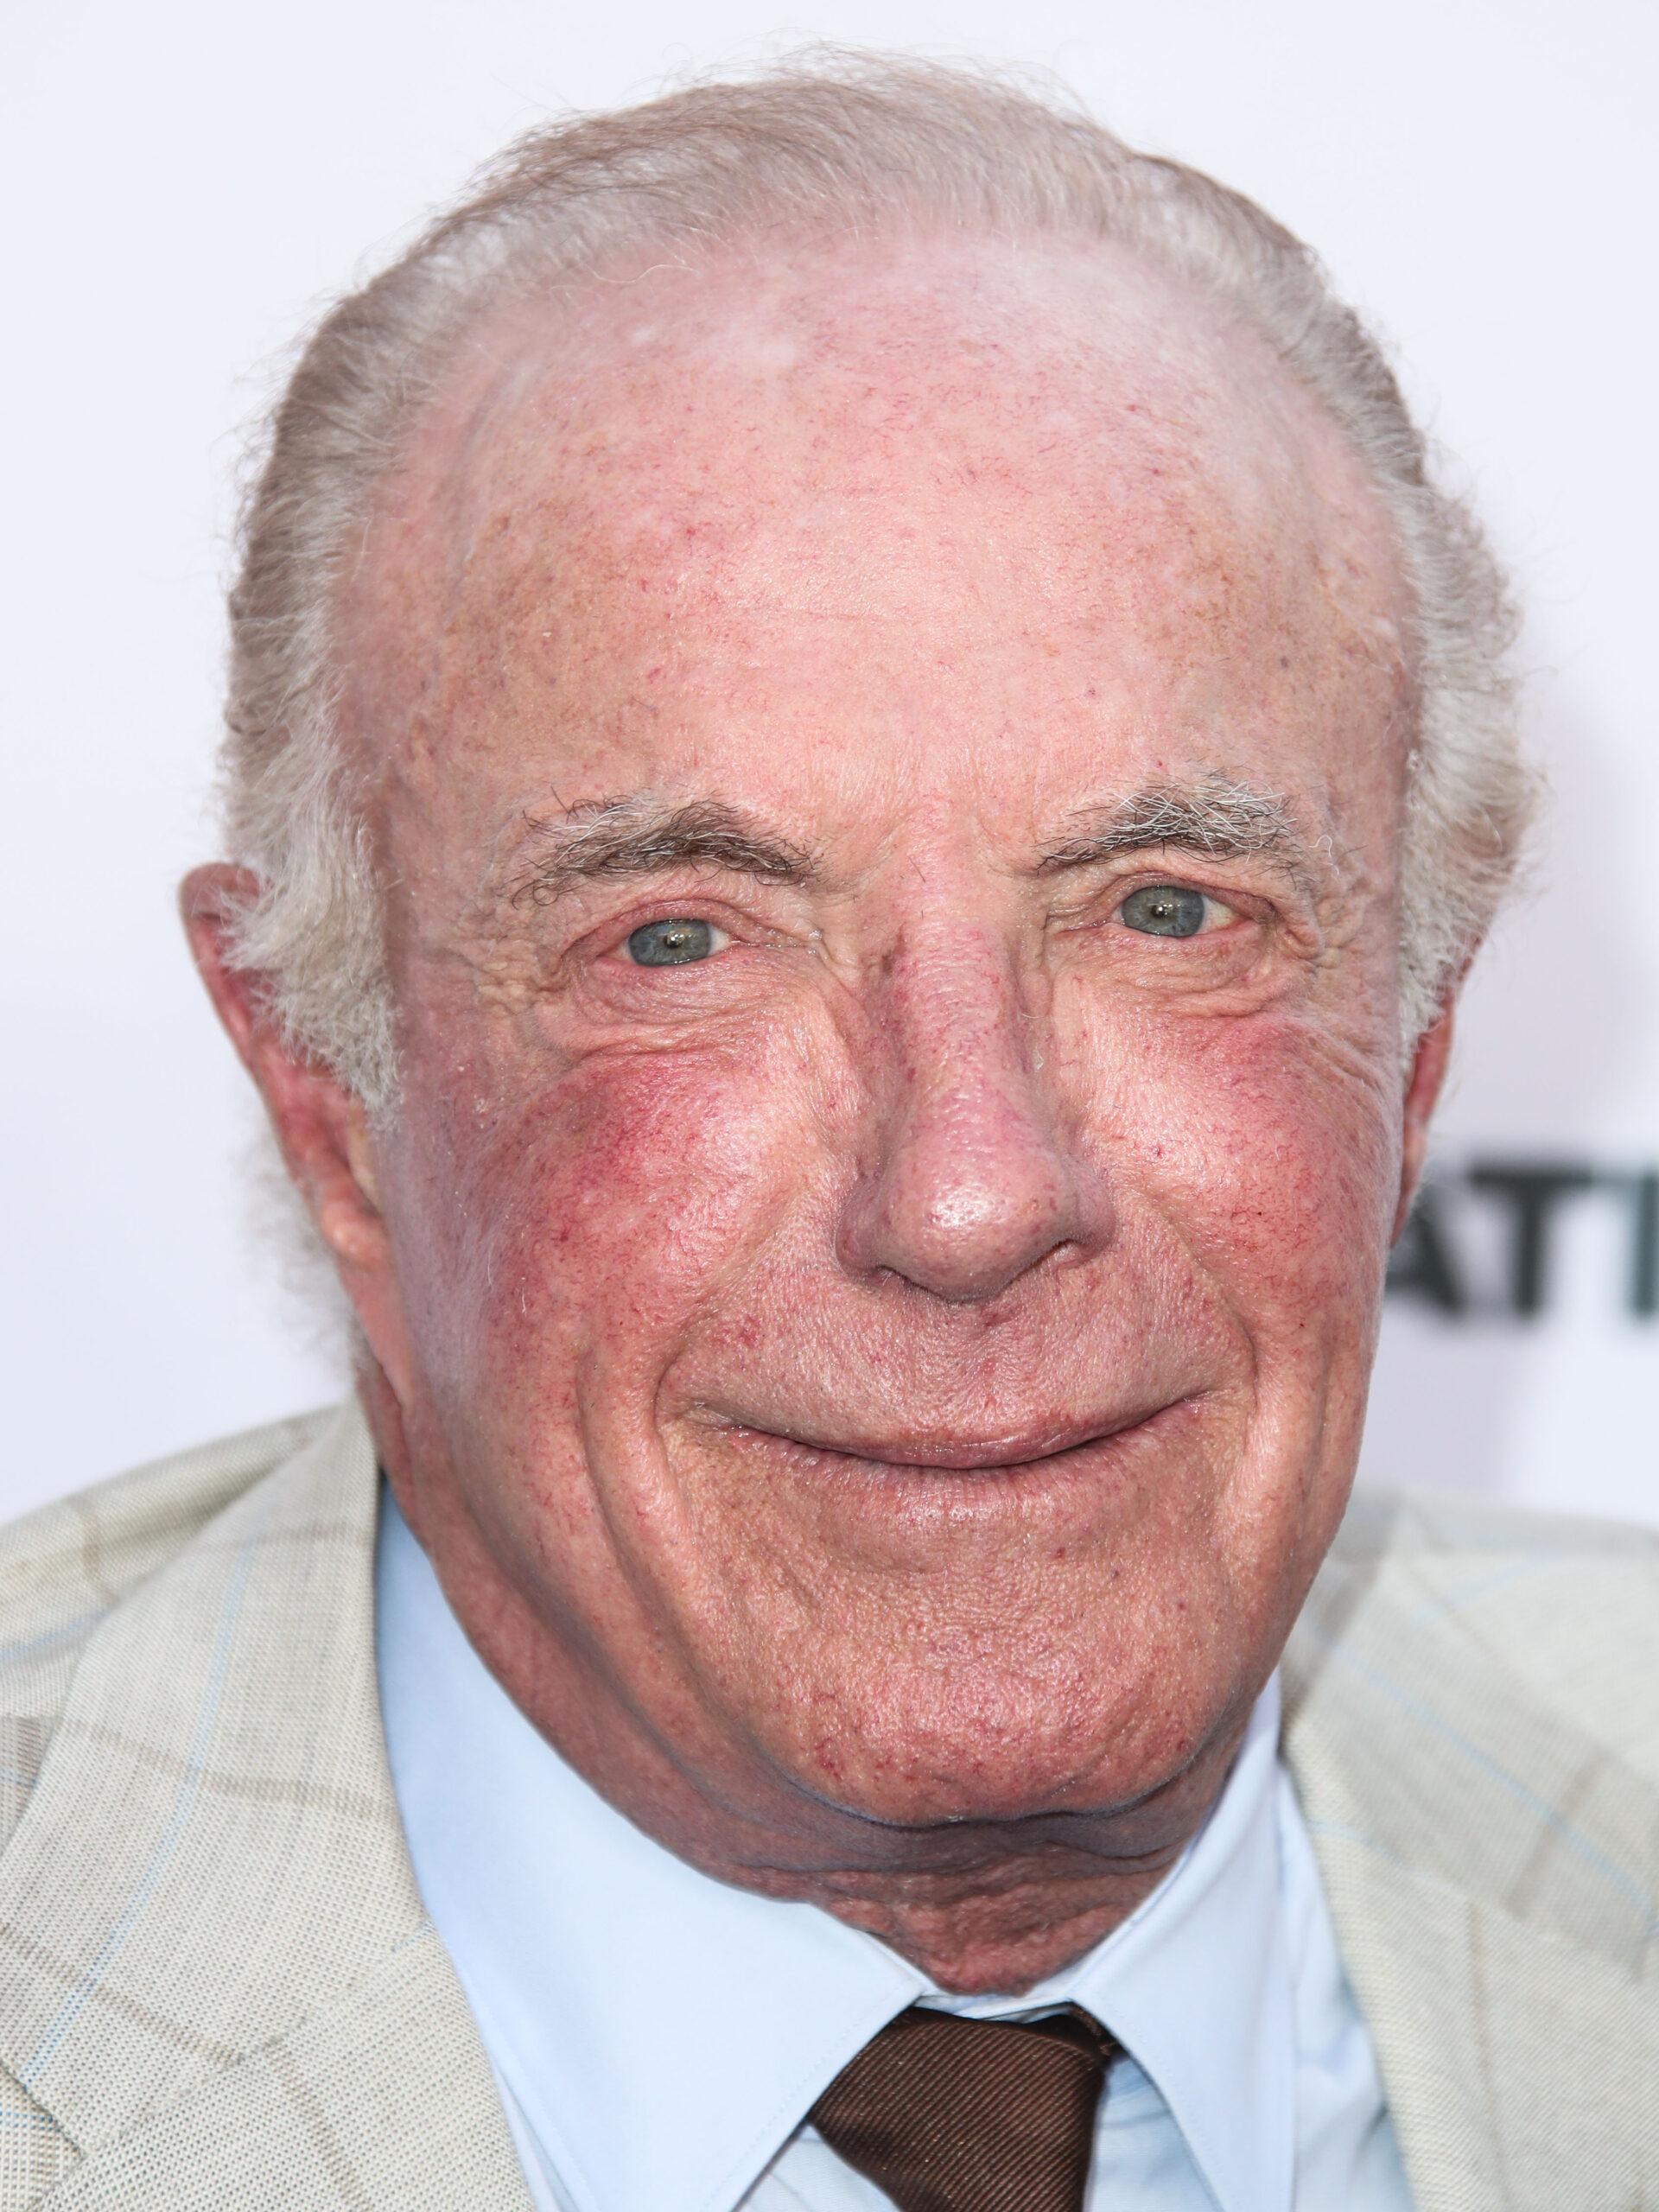 Humane Society Of The United States' Annual To The Rescue! Los Angeles Benefit held at Paramount Studios on April 22, 2017 in Hollywood, California. 22 Apr 2017 Pictured: James Caan. Photo credit: IPA/MEGA TheMegaAgency.com +1 888 505 6342 (Mega Agency TagID: MEGA31124_028.jpg) [Photo via Mega Agency]